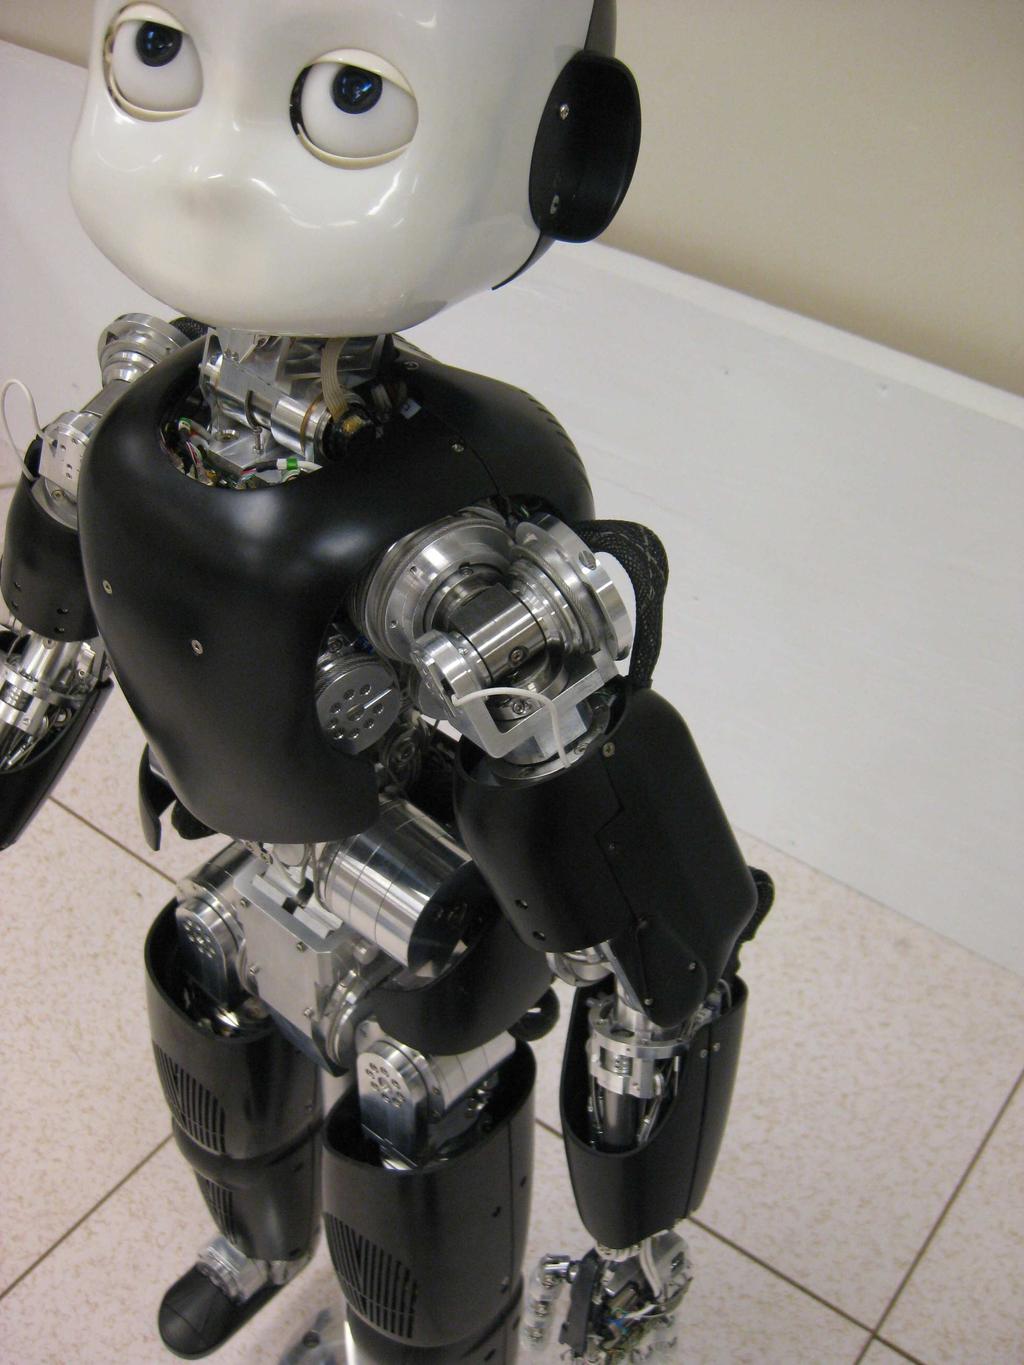 1 Integrating Language and Motor Function on a Humanoid Robot L. Majure, L. Niehaus, A. Duda, A. Silver, L. Wendt, S.